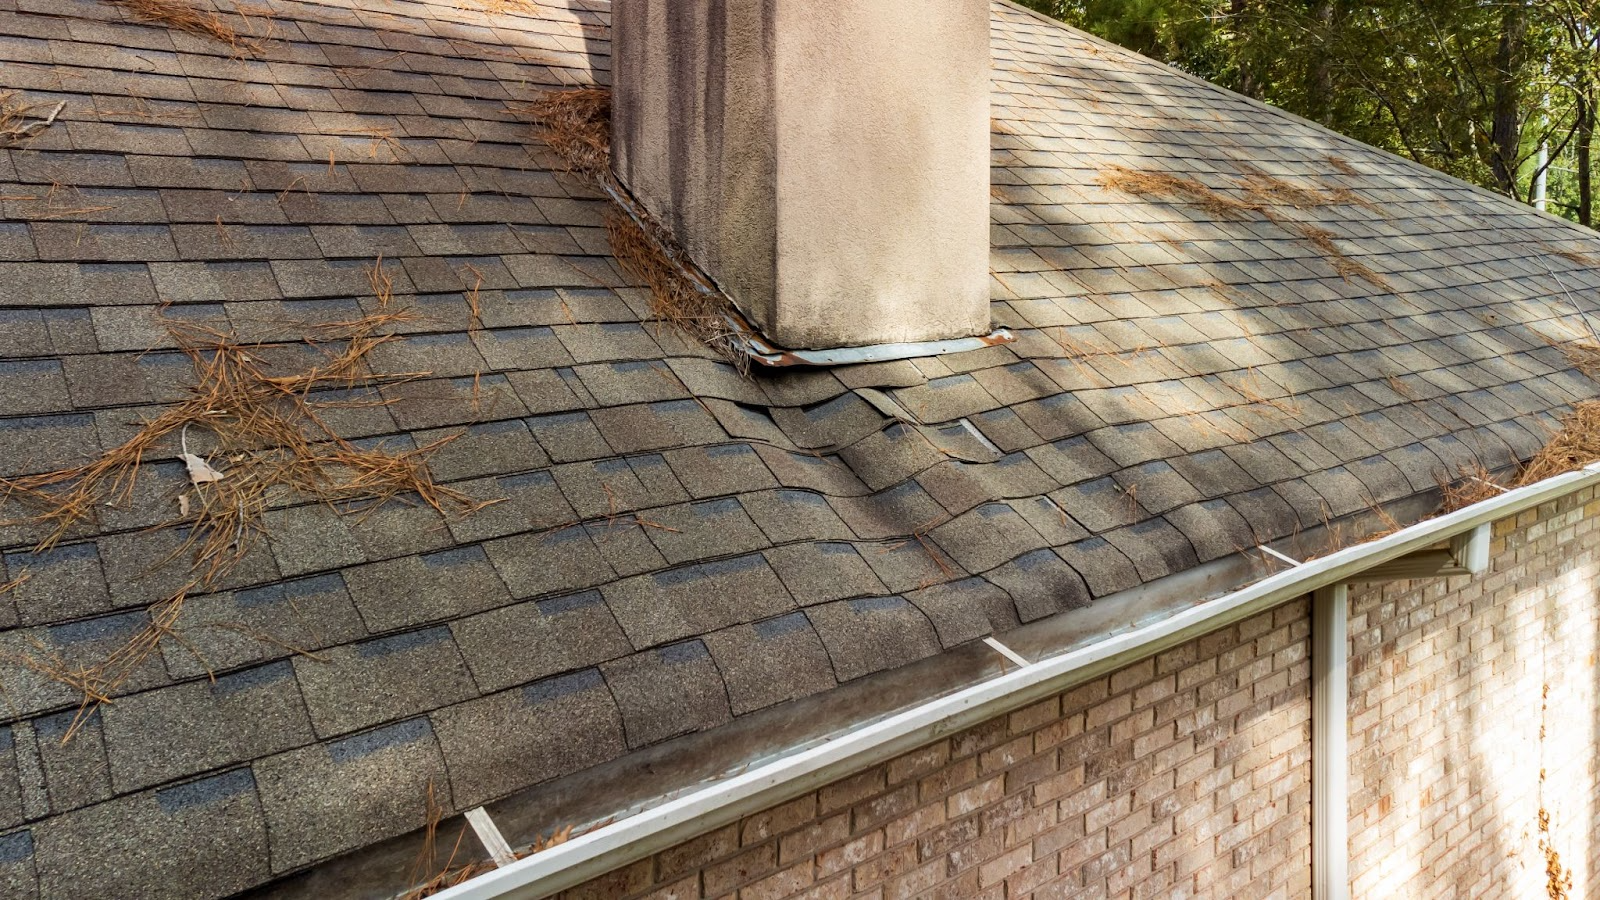 Identifying Signs of Roof Damage